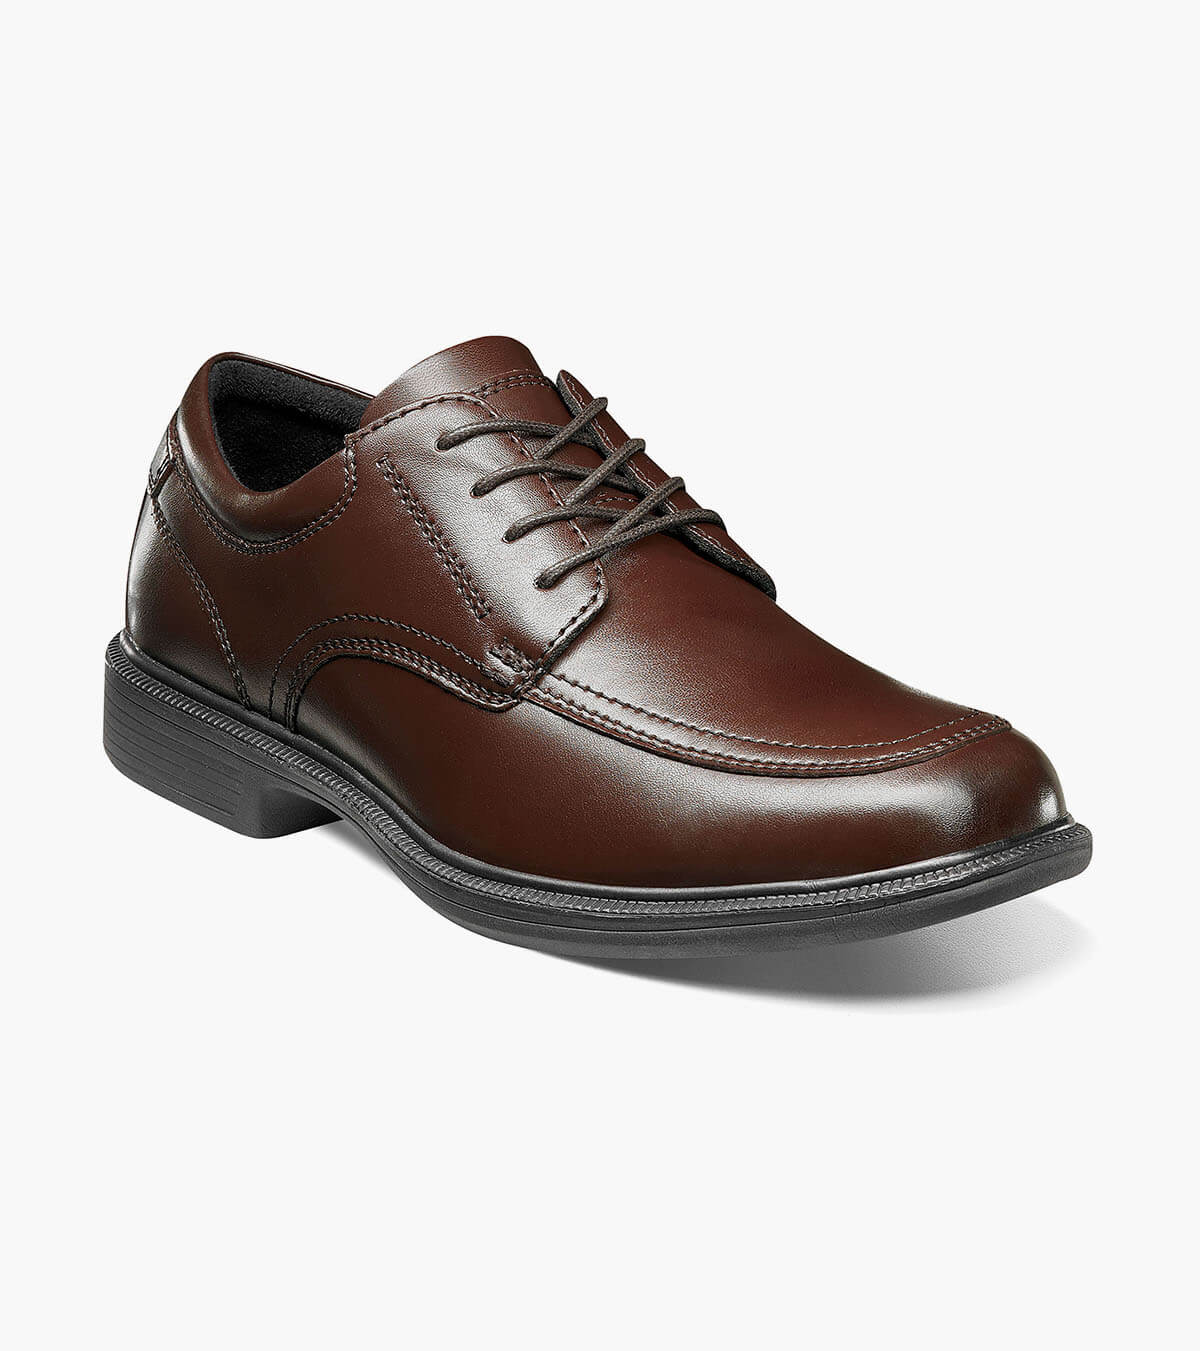 Boys Lace-up Oxford Brogue Shoes OXBLOOD size 4 **SALE** £15 Post Free